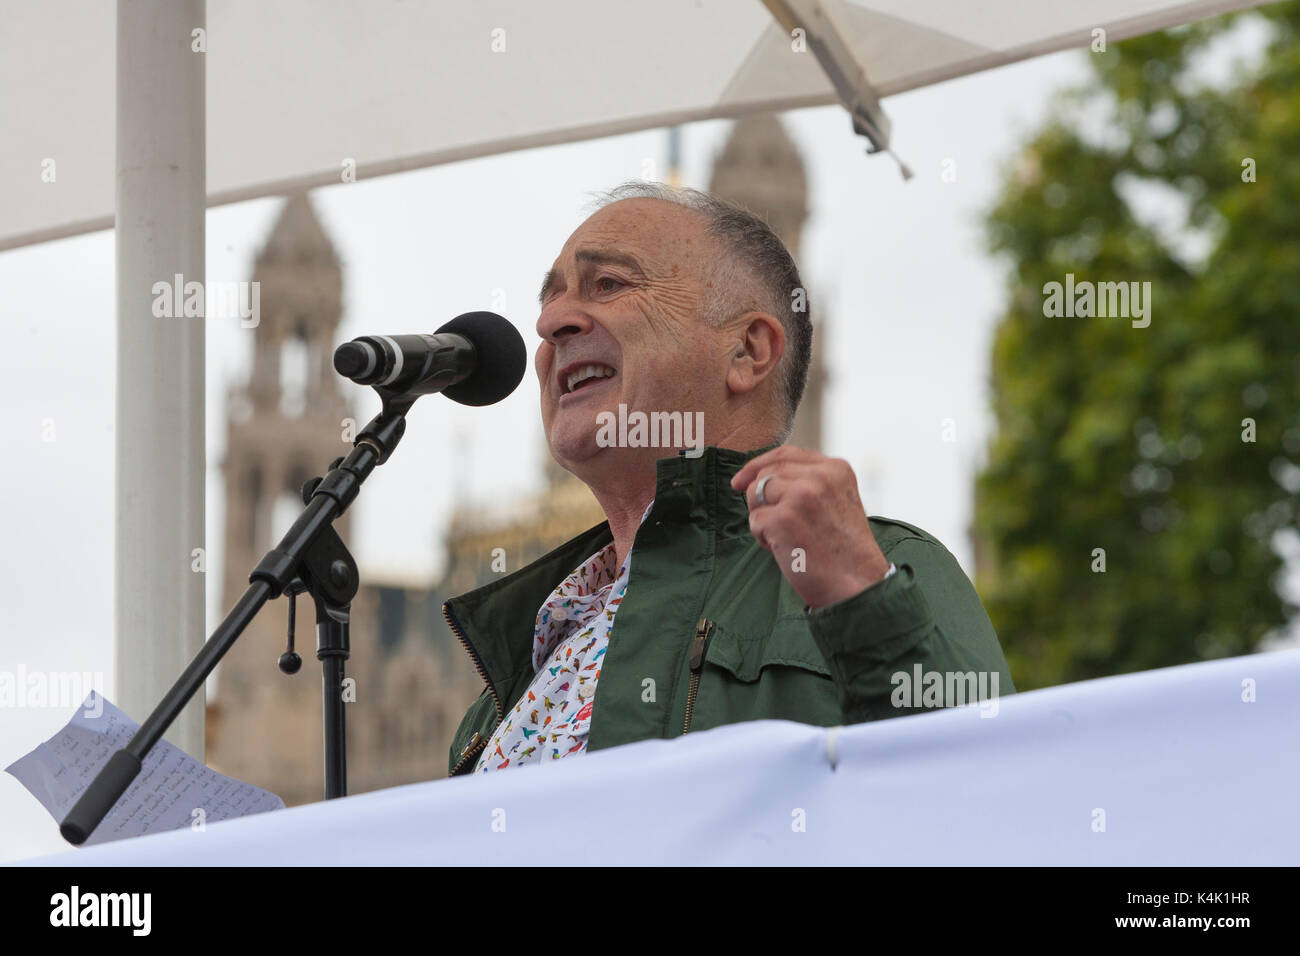 RCN Scrap the Cap Rally: Parliament Square, London UK. 6th September, 2017.  RCN (Royal Collage of Nursing) members stage a Rally to tell the UK government that’s time to scrap the cap on nursing pay. With guest speaker actor and writer Sir Tony Robinson. Credit: Steve Parkins/Alamy Live News Stock Photo